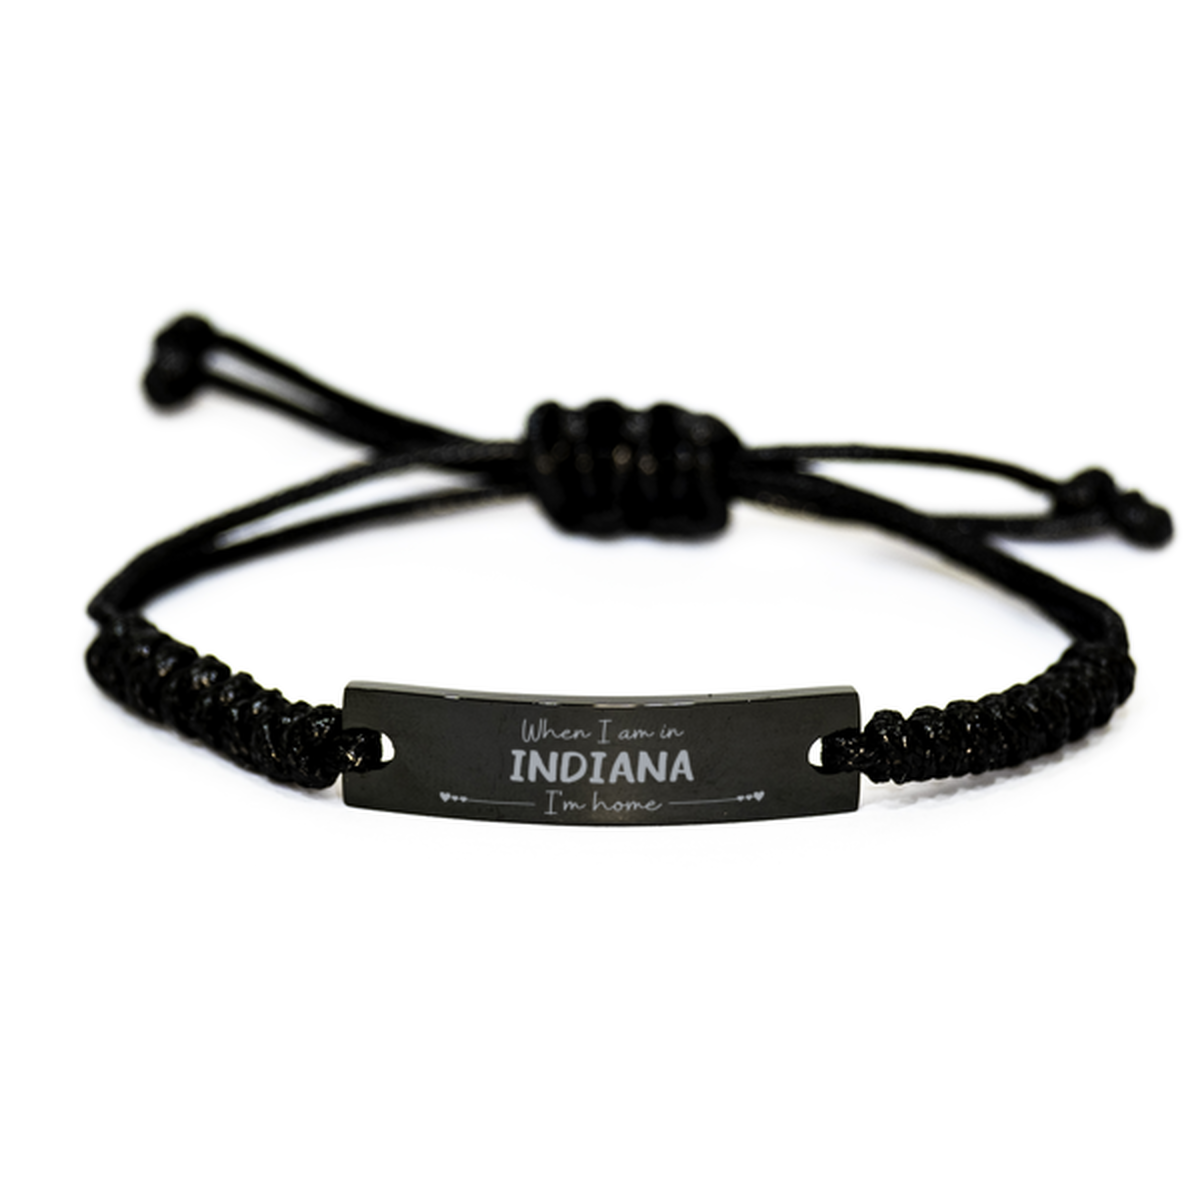 When I am in Indiana I'm home Black Rope Bracelet, Cheap Gifts For Indiana, State Indiana Birthday Gifts for Friends Coworker